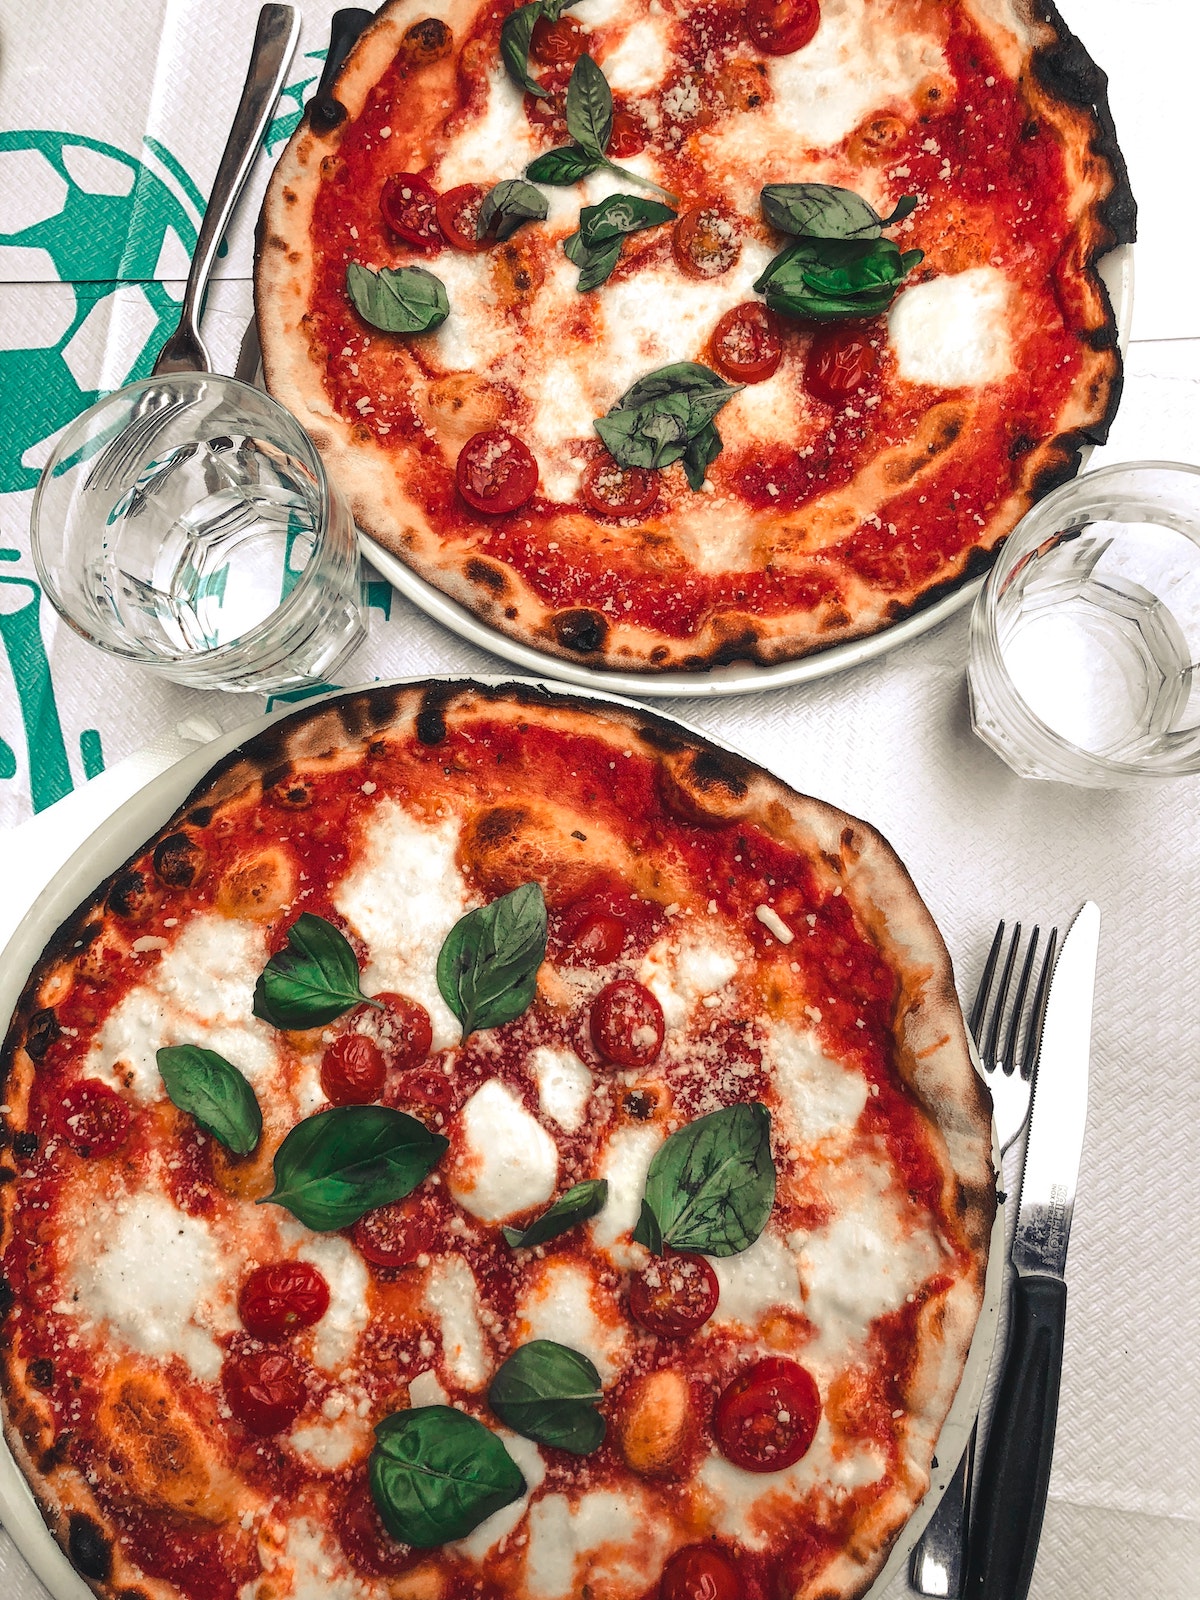 Overhead shot of two whole margherita pizzas with tomato, basil, and mozzarella cheese